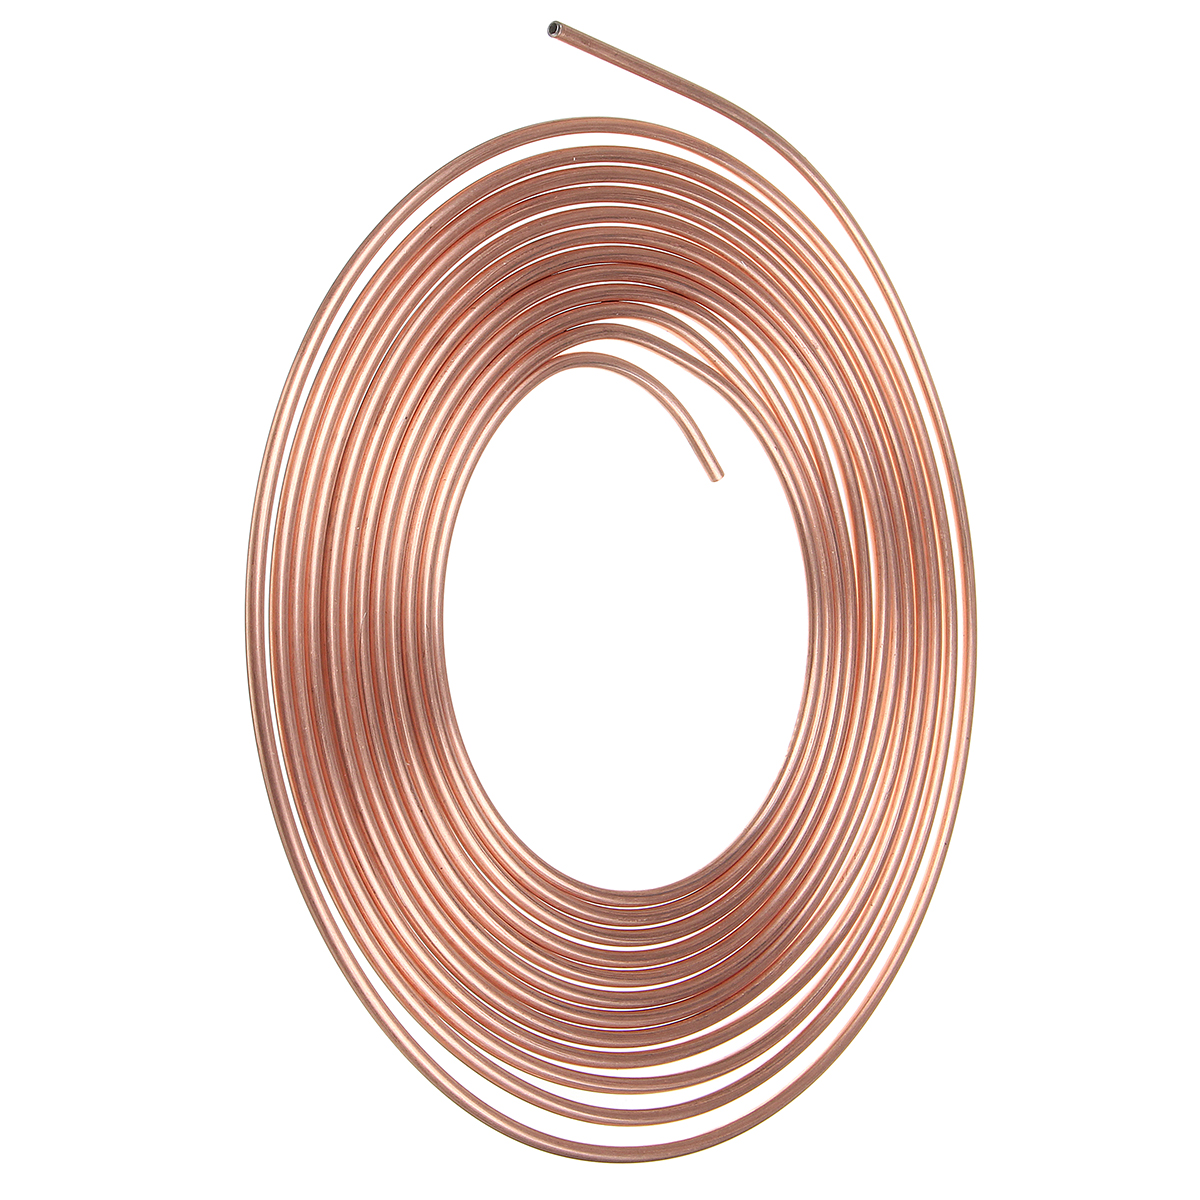 Roll-Copper-Steel-25-ft-316quot-Brake-Line-Pipe-Tubing-with-20-Pcs-Kit-Fittings-Brake-Female-Male-Nu-1543212-3